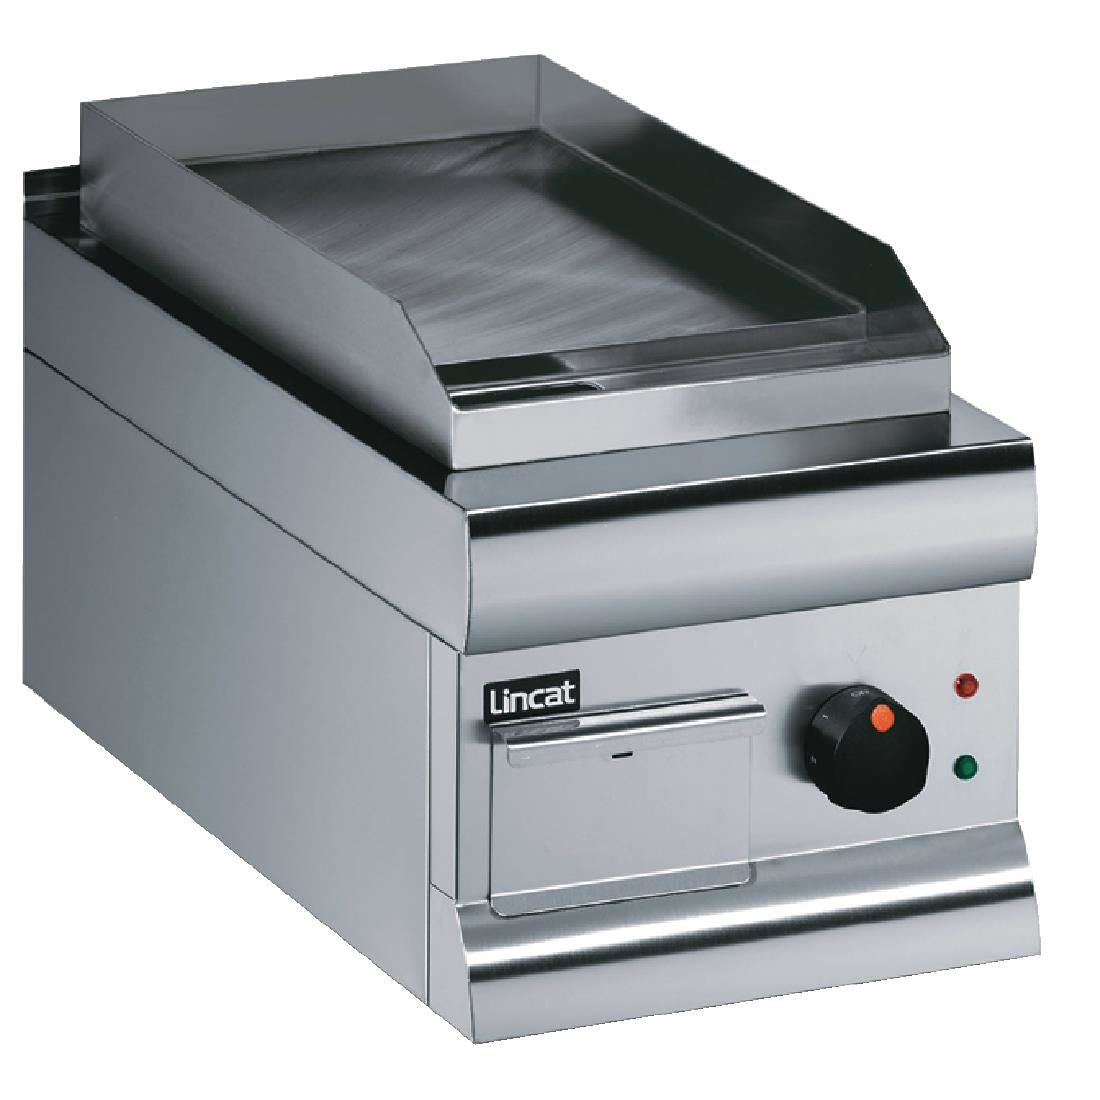 GS3 - Lincat Silverlink 600 Electric Counter-top Griddle - Steel Plate - W 300 mm - 2.0 kW J538 JD Catering Equipment Solutions Ltd